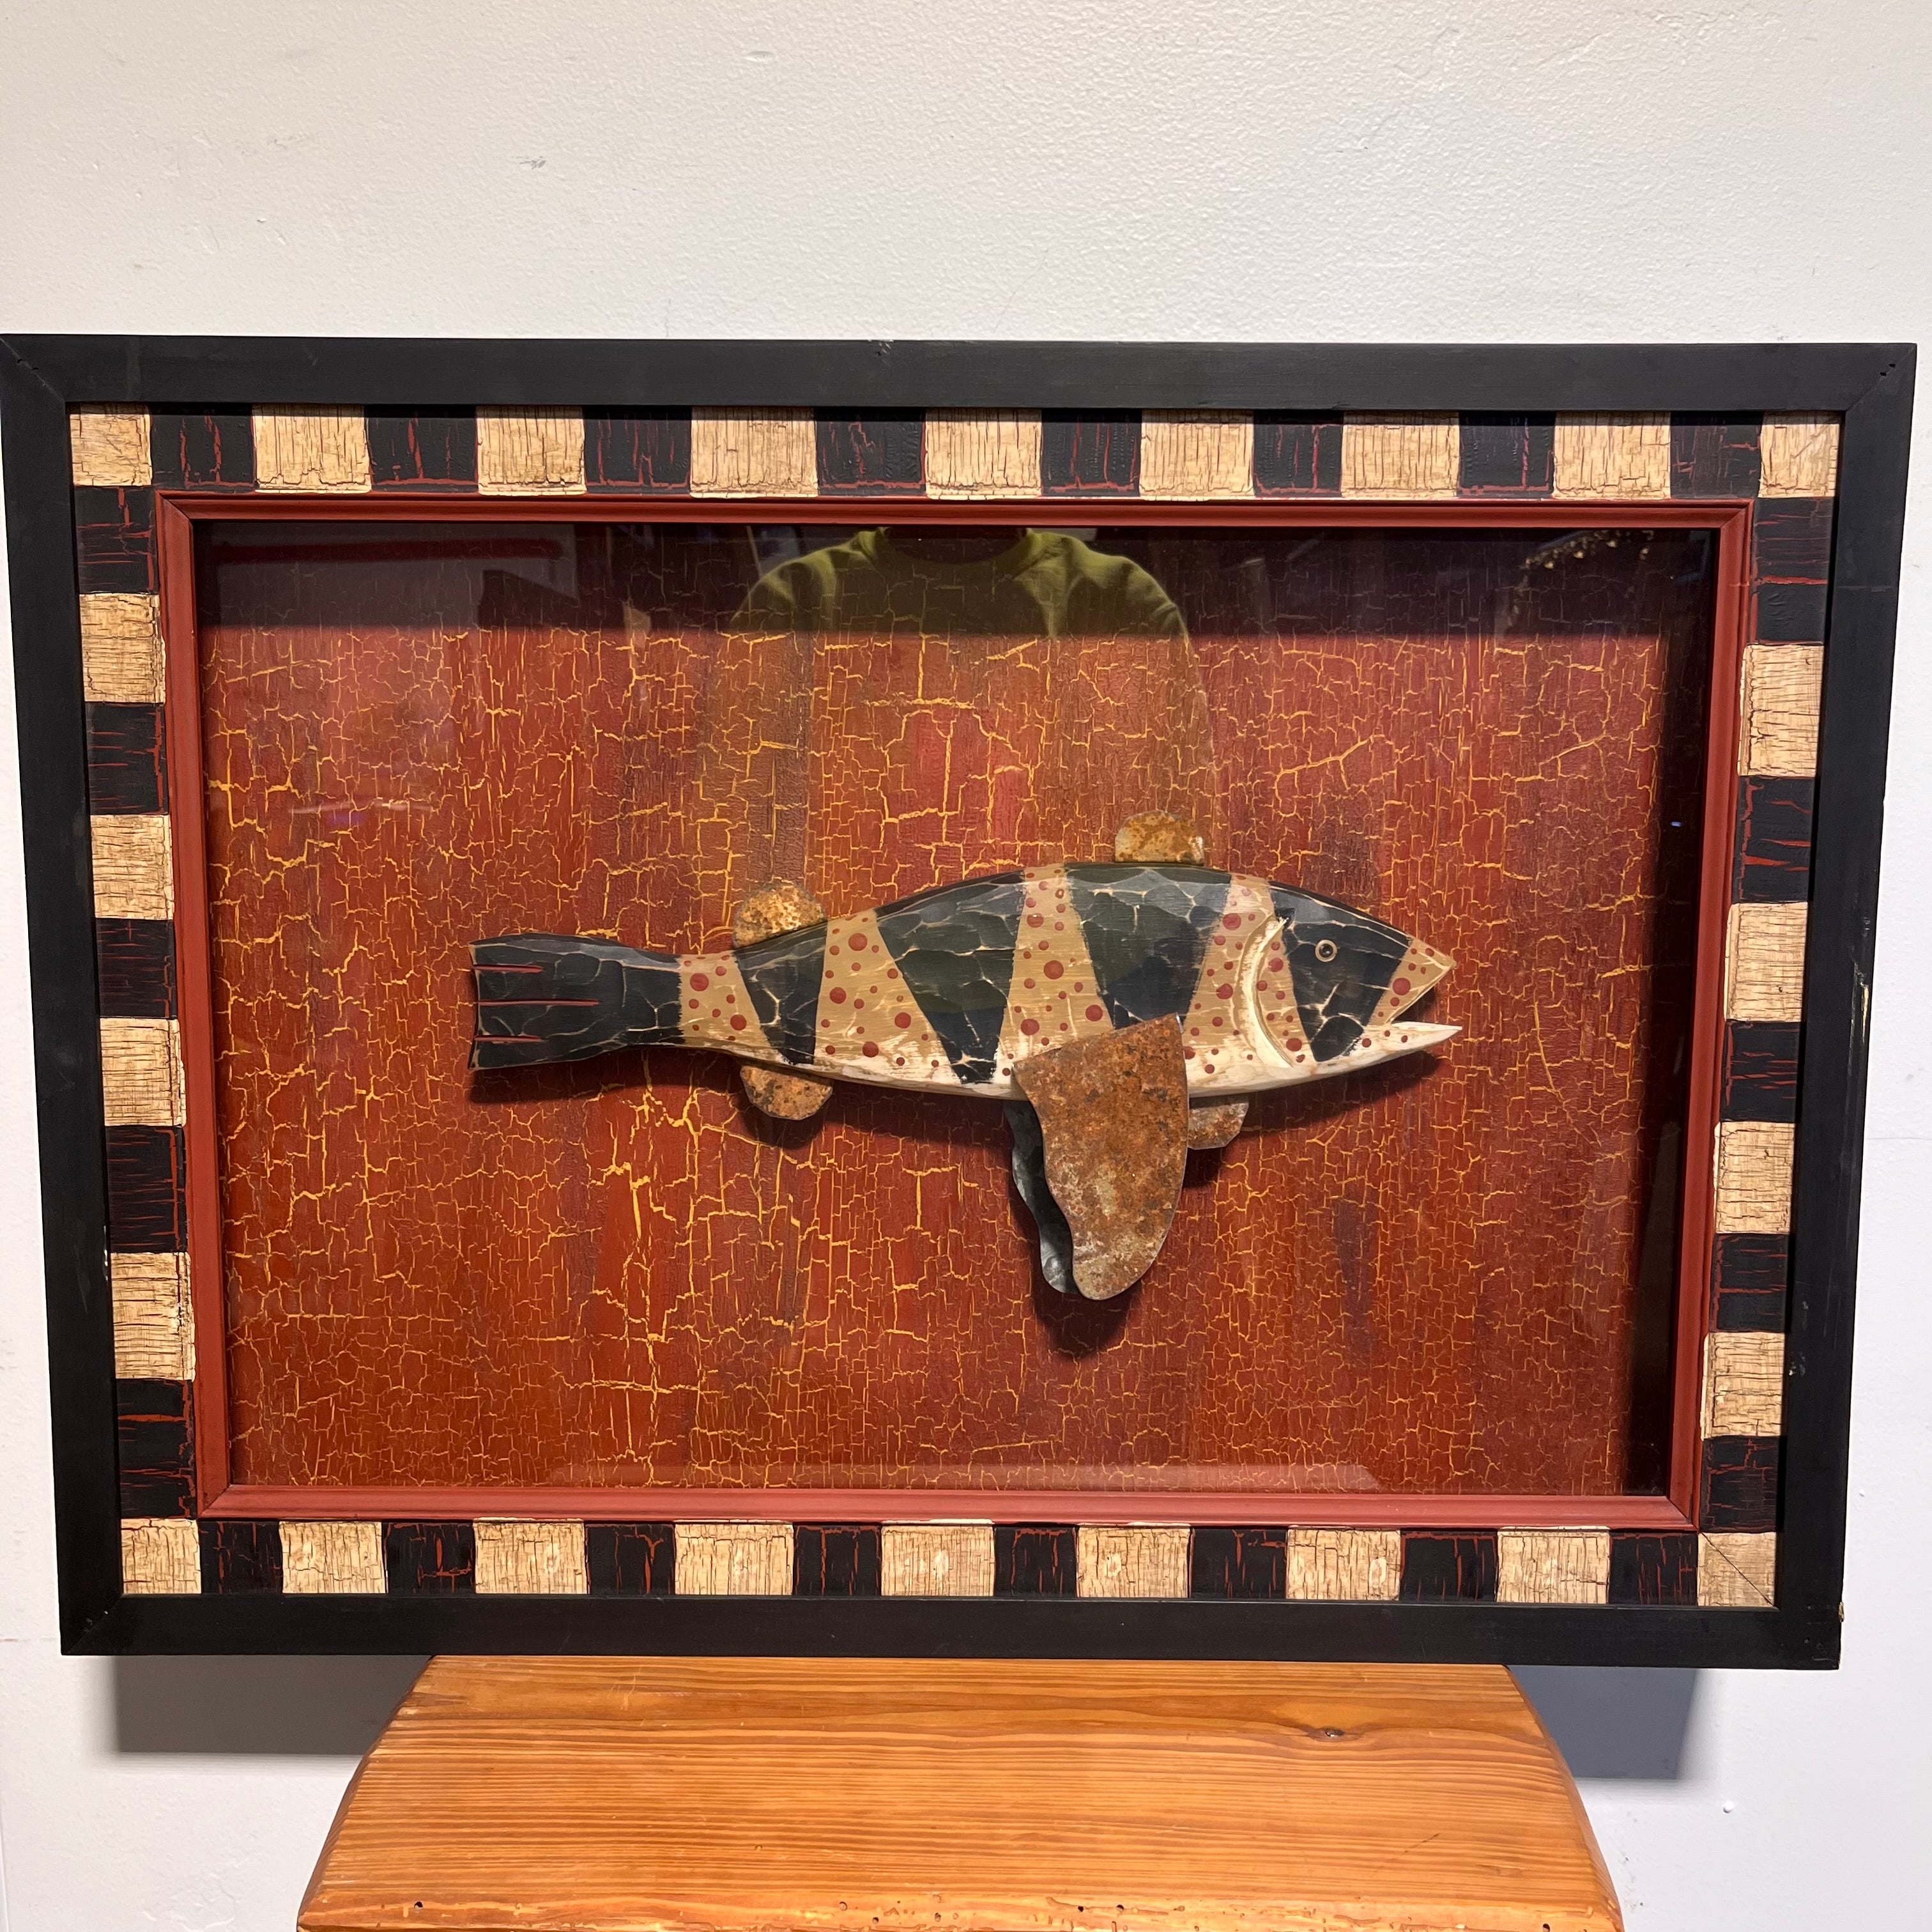 "Flying Fish" Hand Carved and Painted Framed Wall Sculpture 28.75"x 21"x 3"